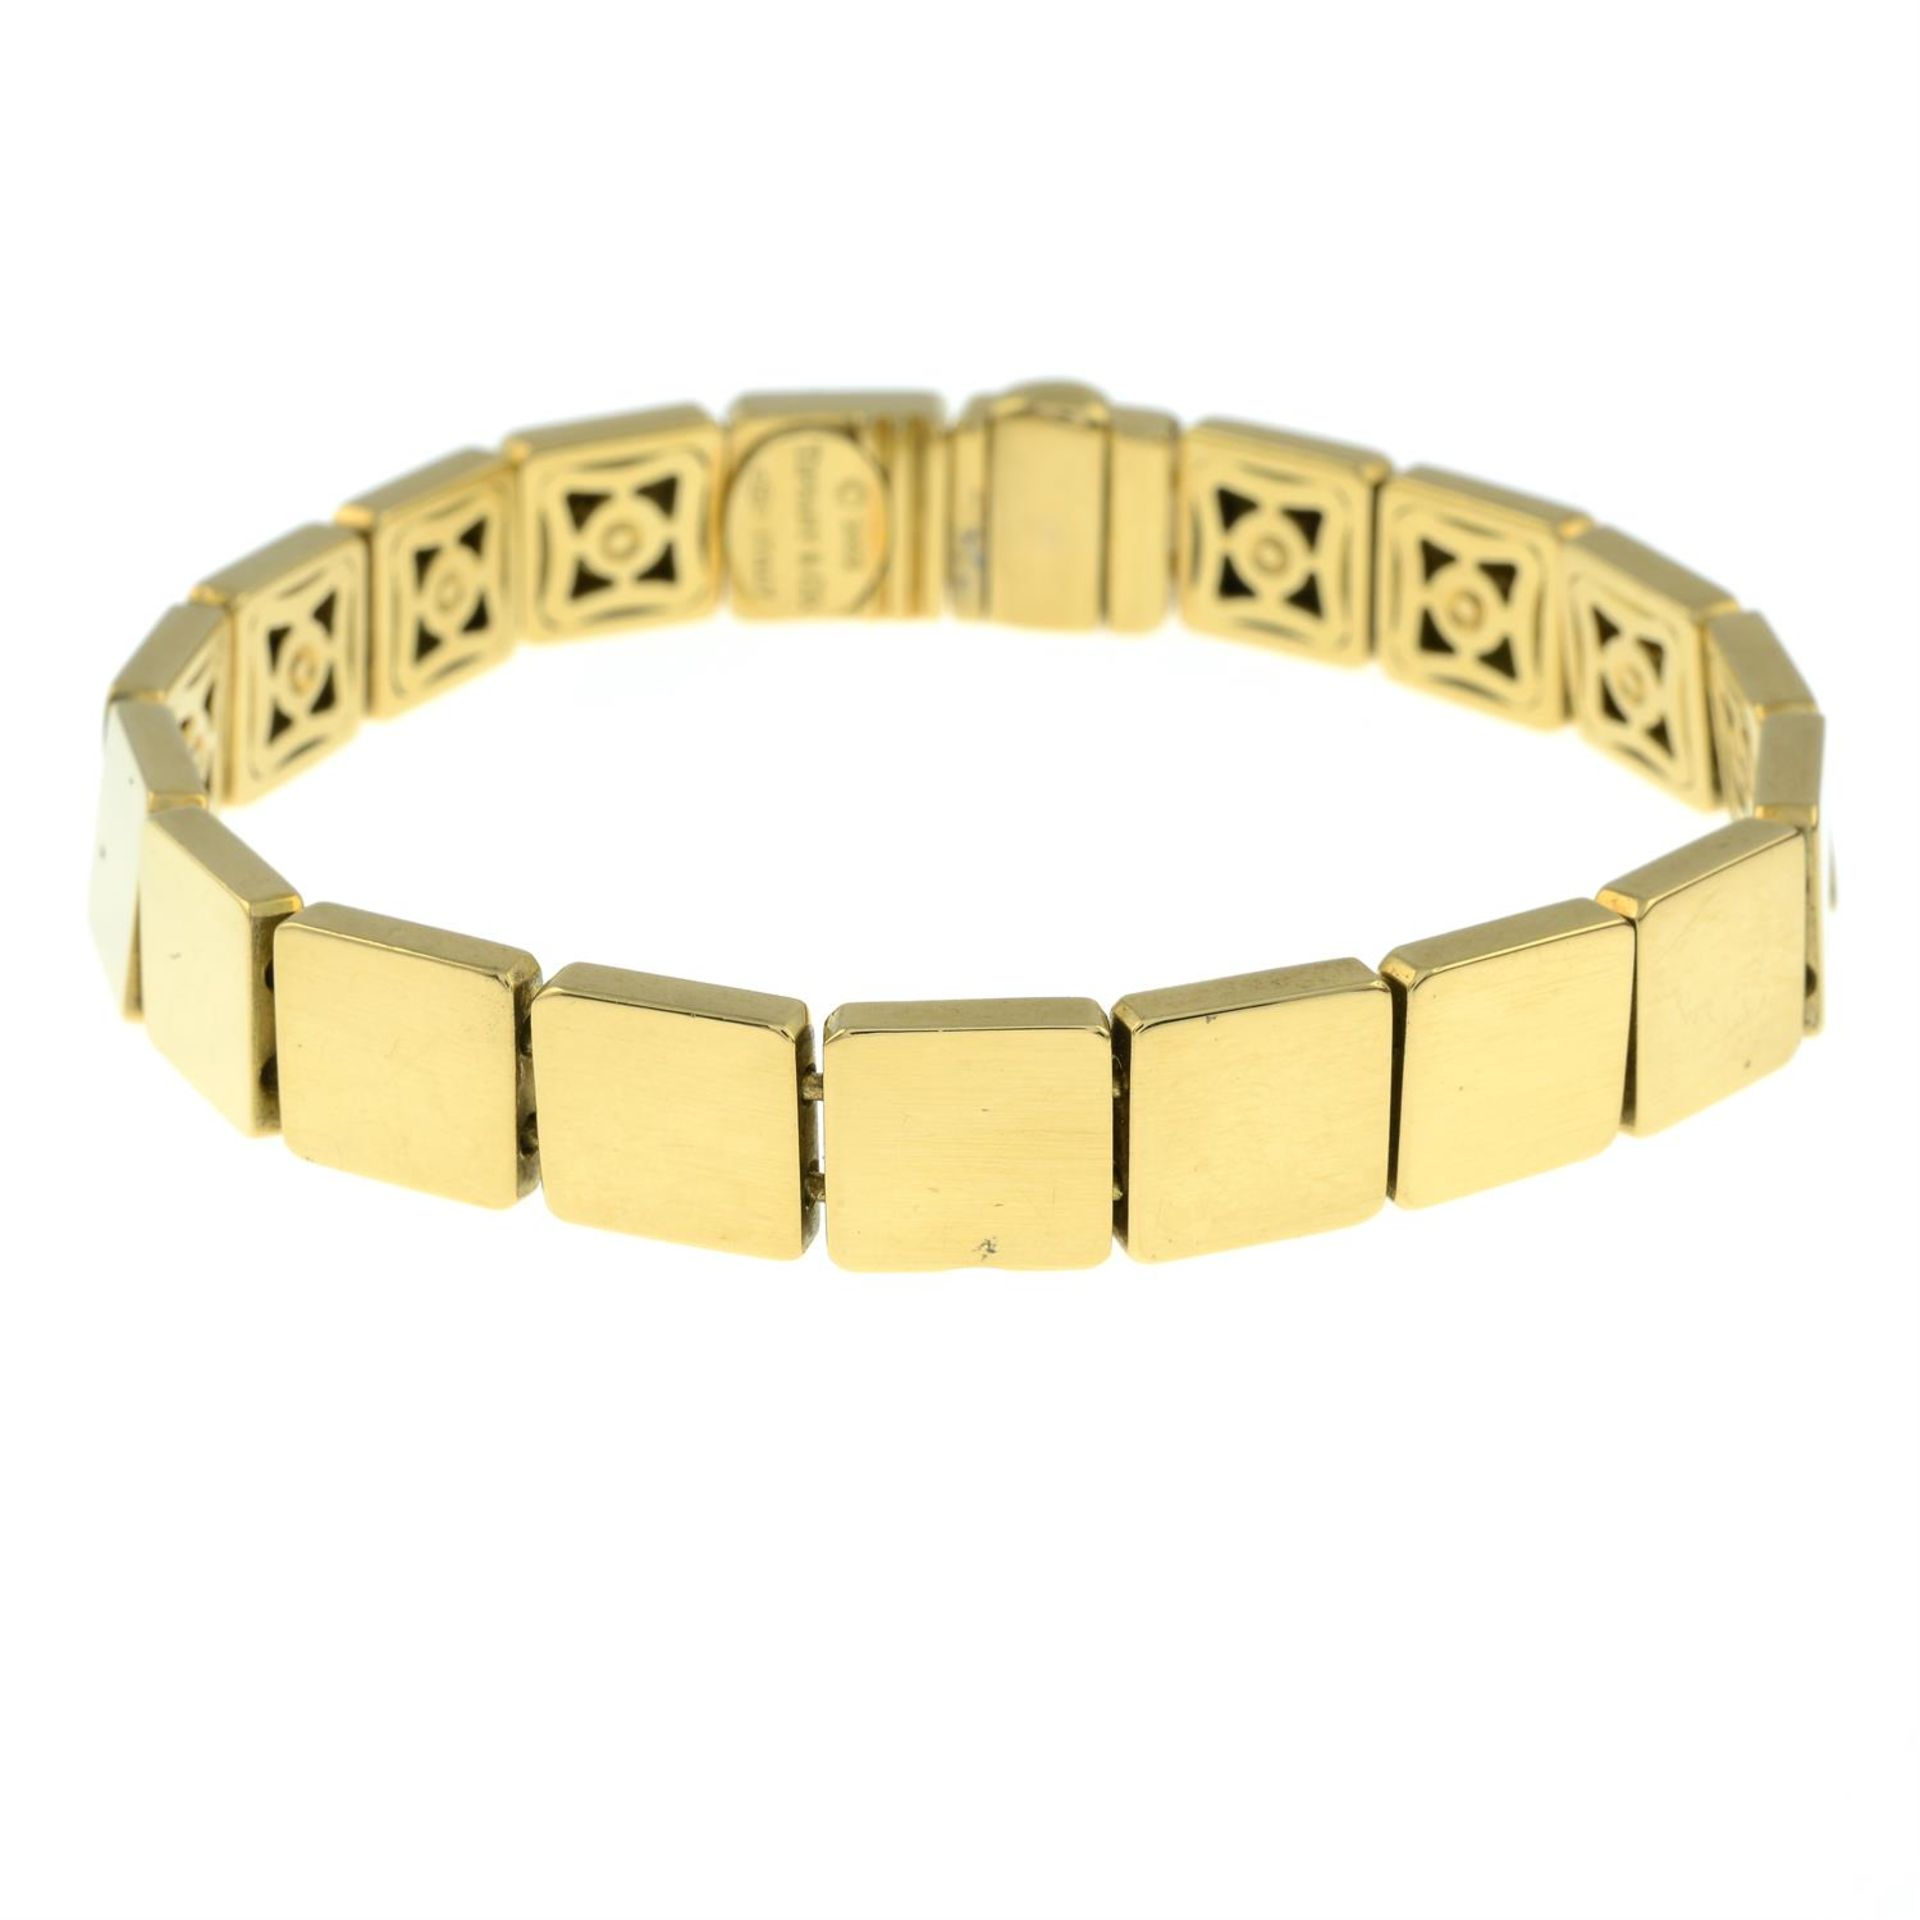 An 18ct gold square tile-link bracelet, by Tiffany and Co. - Image 2 of 5